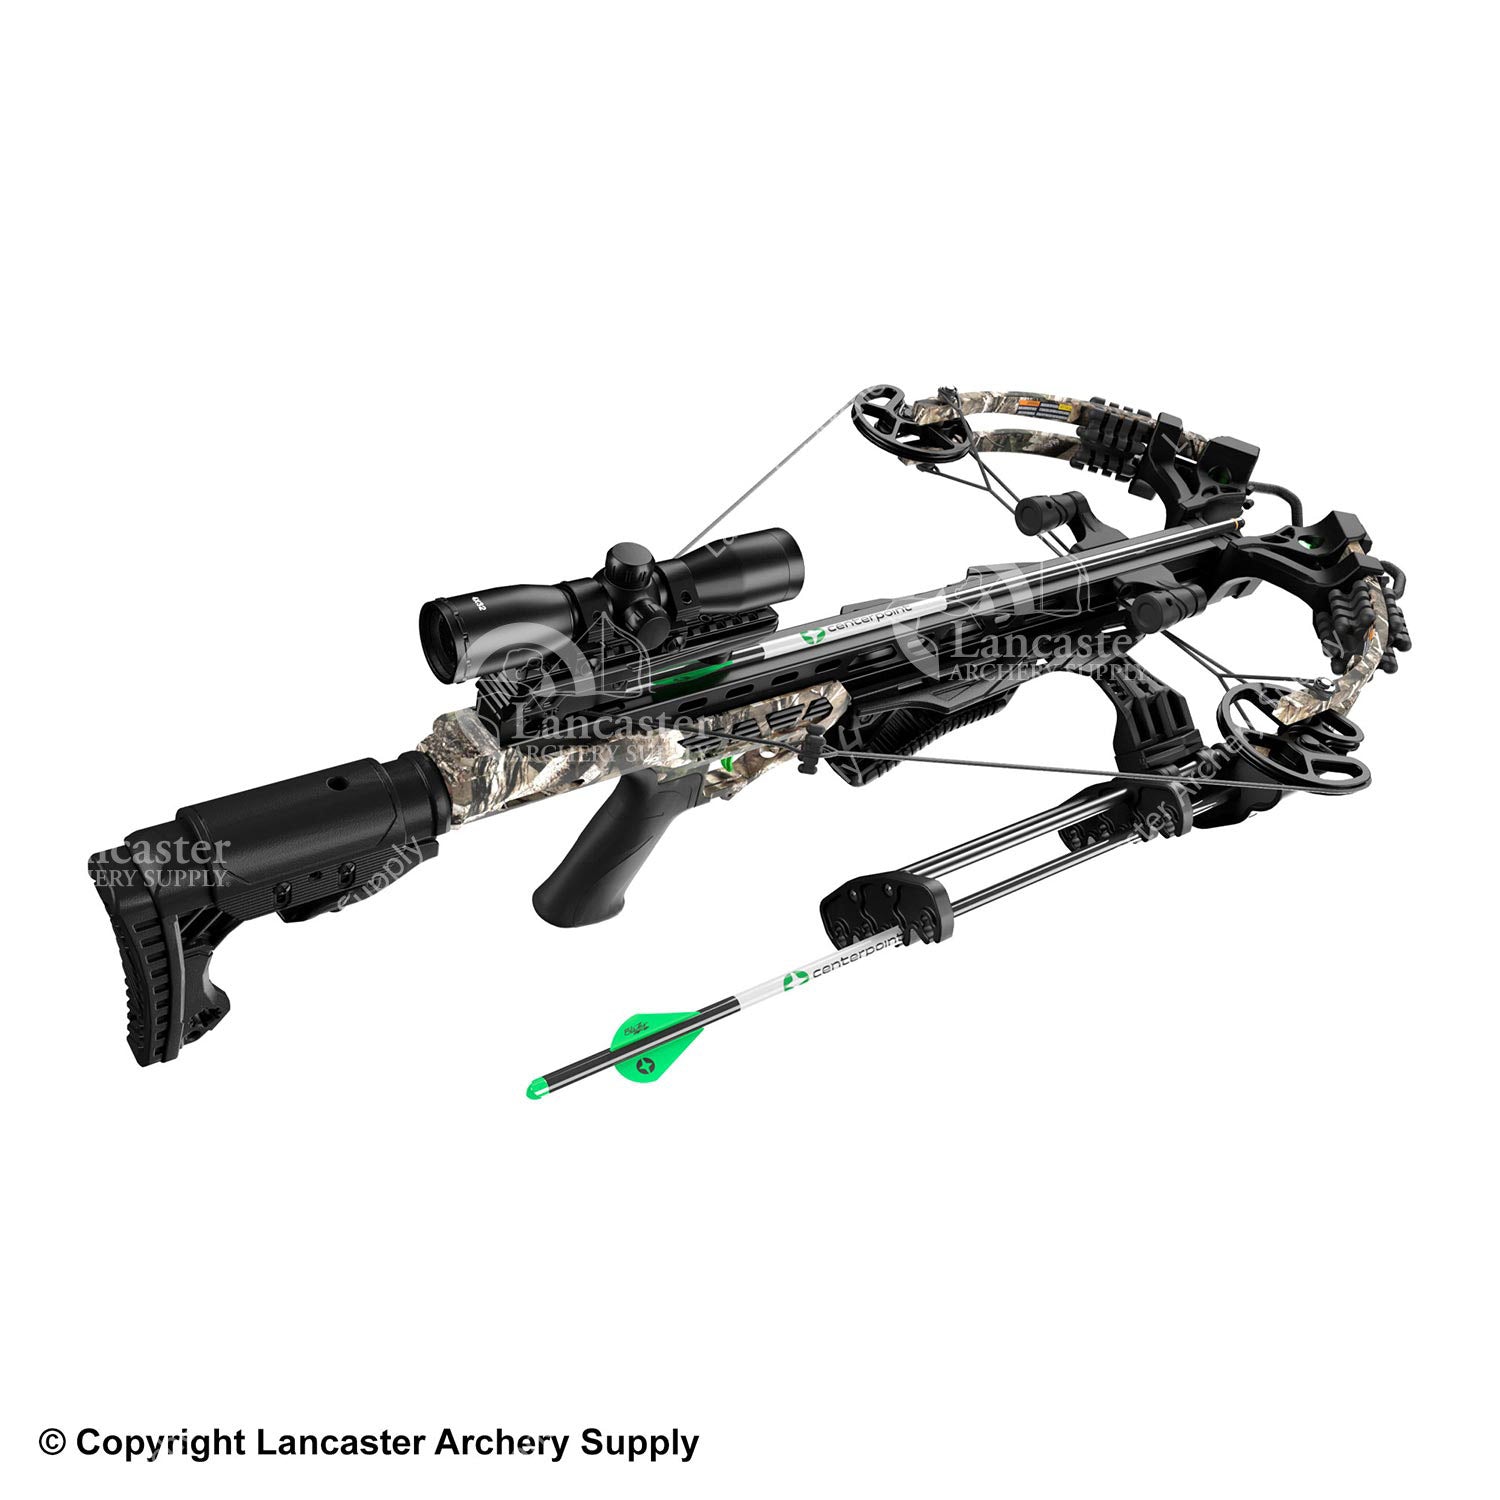 CenterPoint Heat 425 Crossbow Package